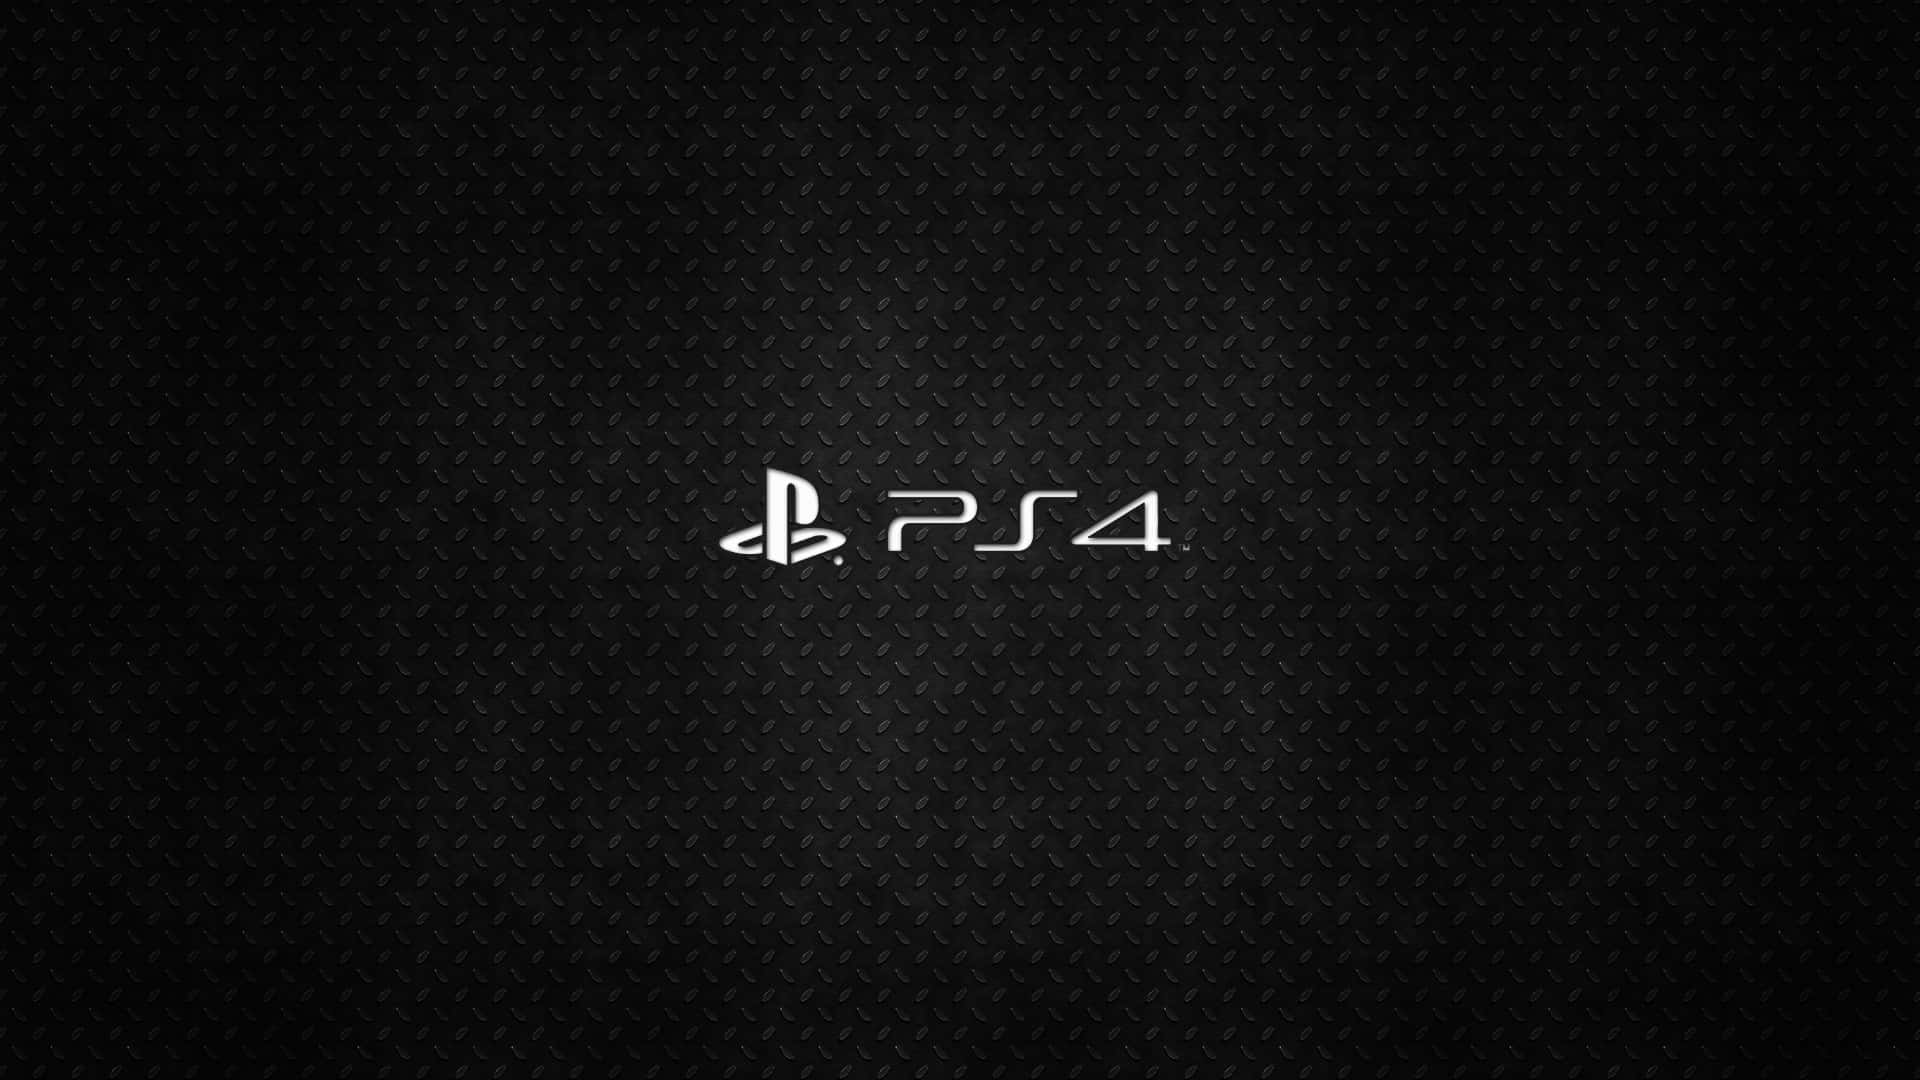 Simple Cool Ps4 With Large Logo In White In The Middle Wallpaper